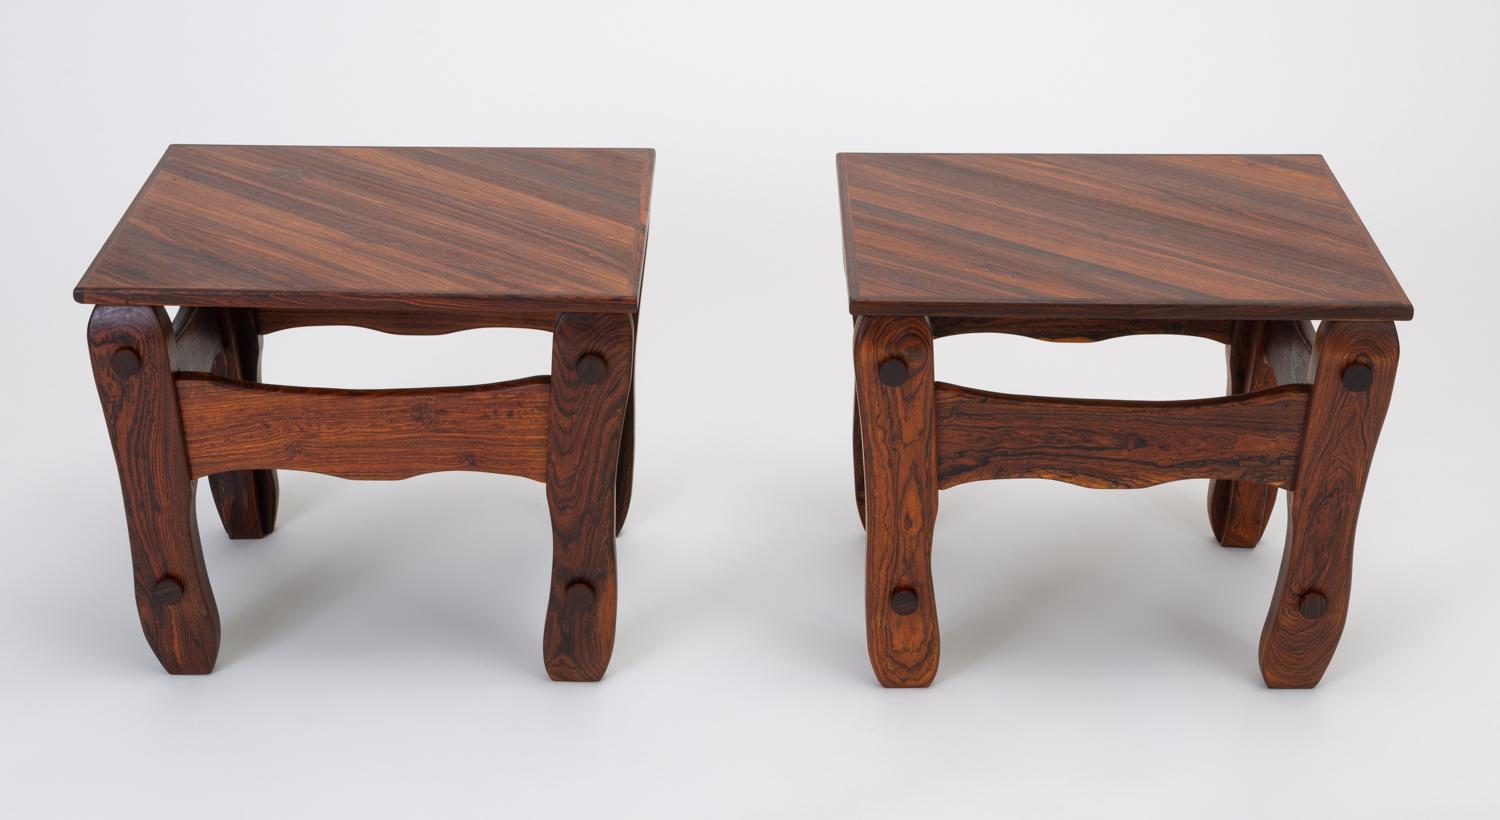 A pair of side tables from Don Shoemaker’s “Descanso” line produced in highly figured cueramo wood. The blocky construction and broad planes of the frame showcase the almost marbled appearance of the woodgrain, while the wavy edges and exaggerated